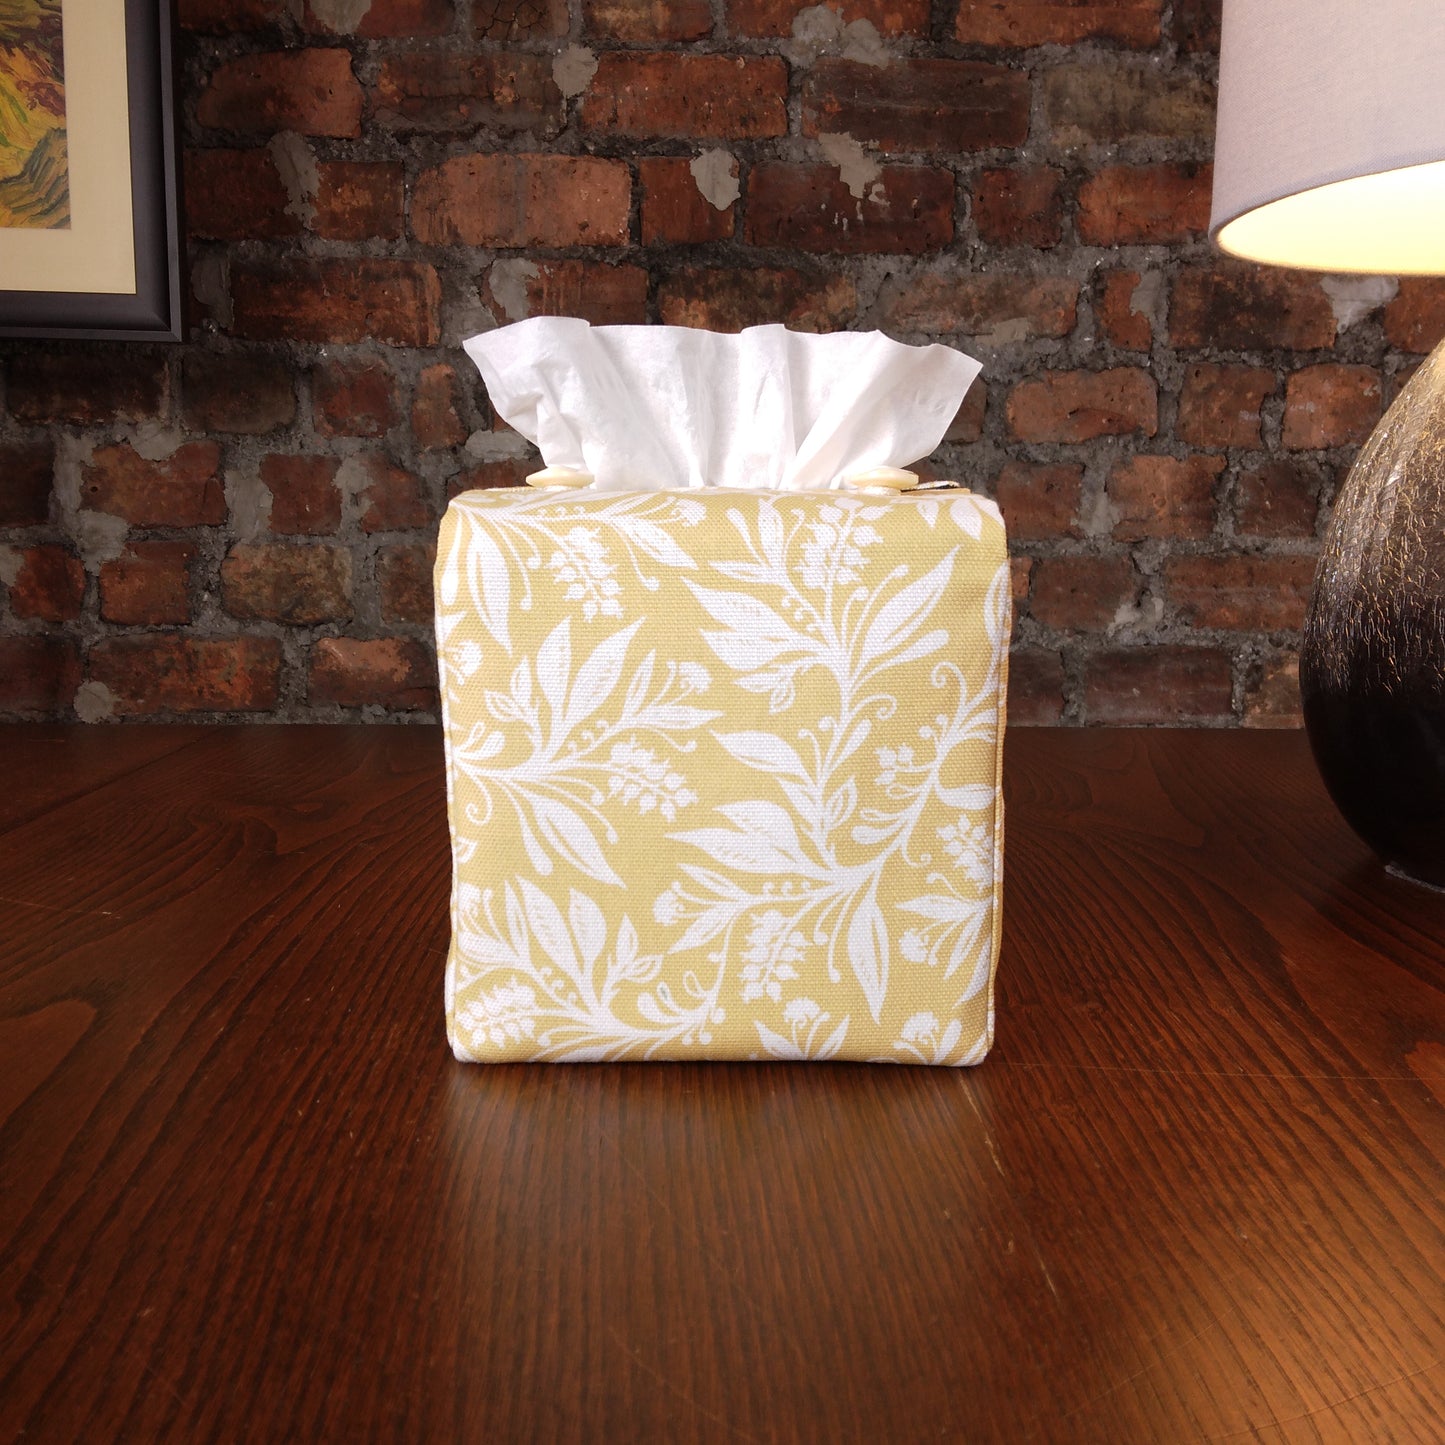 Cube Fabric Tissue Box Cover - Wildflowers on Yellow